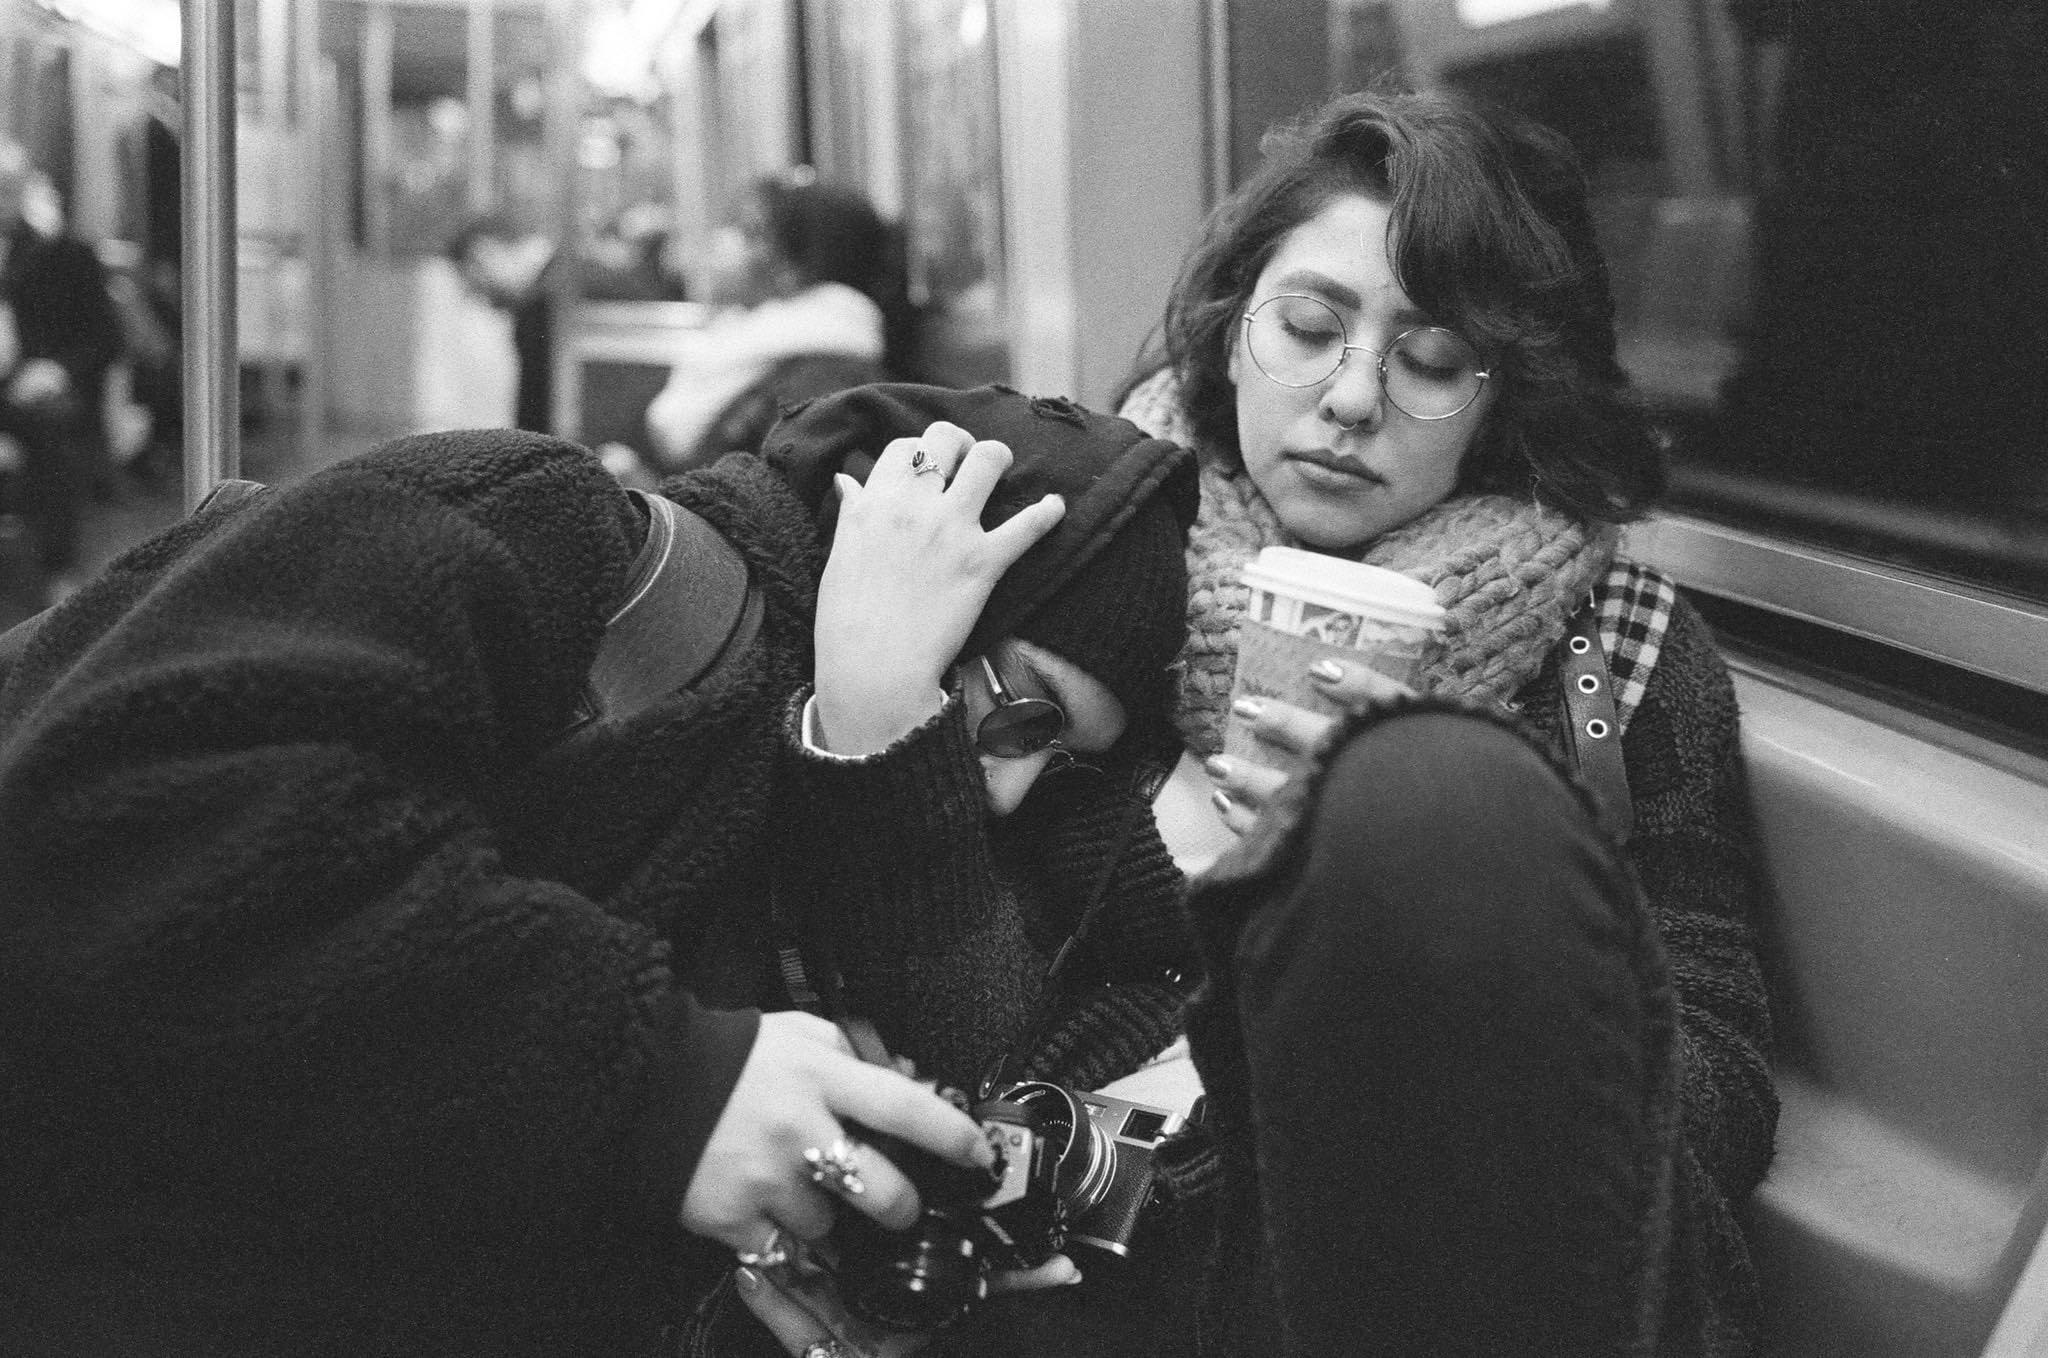 Jack-Peter and Flor de Liz riding on a NYC train after a long day of exploring Manhattan with their close friend, Miguel Cortes.